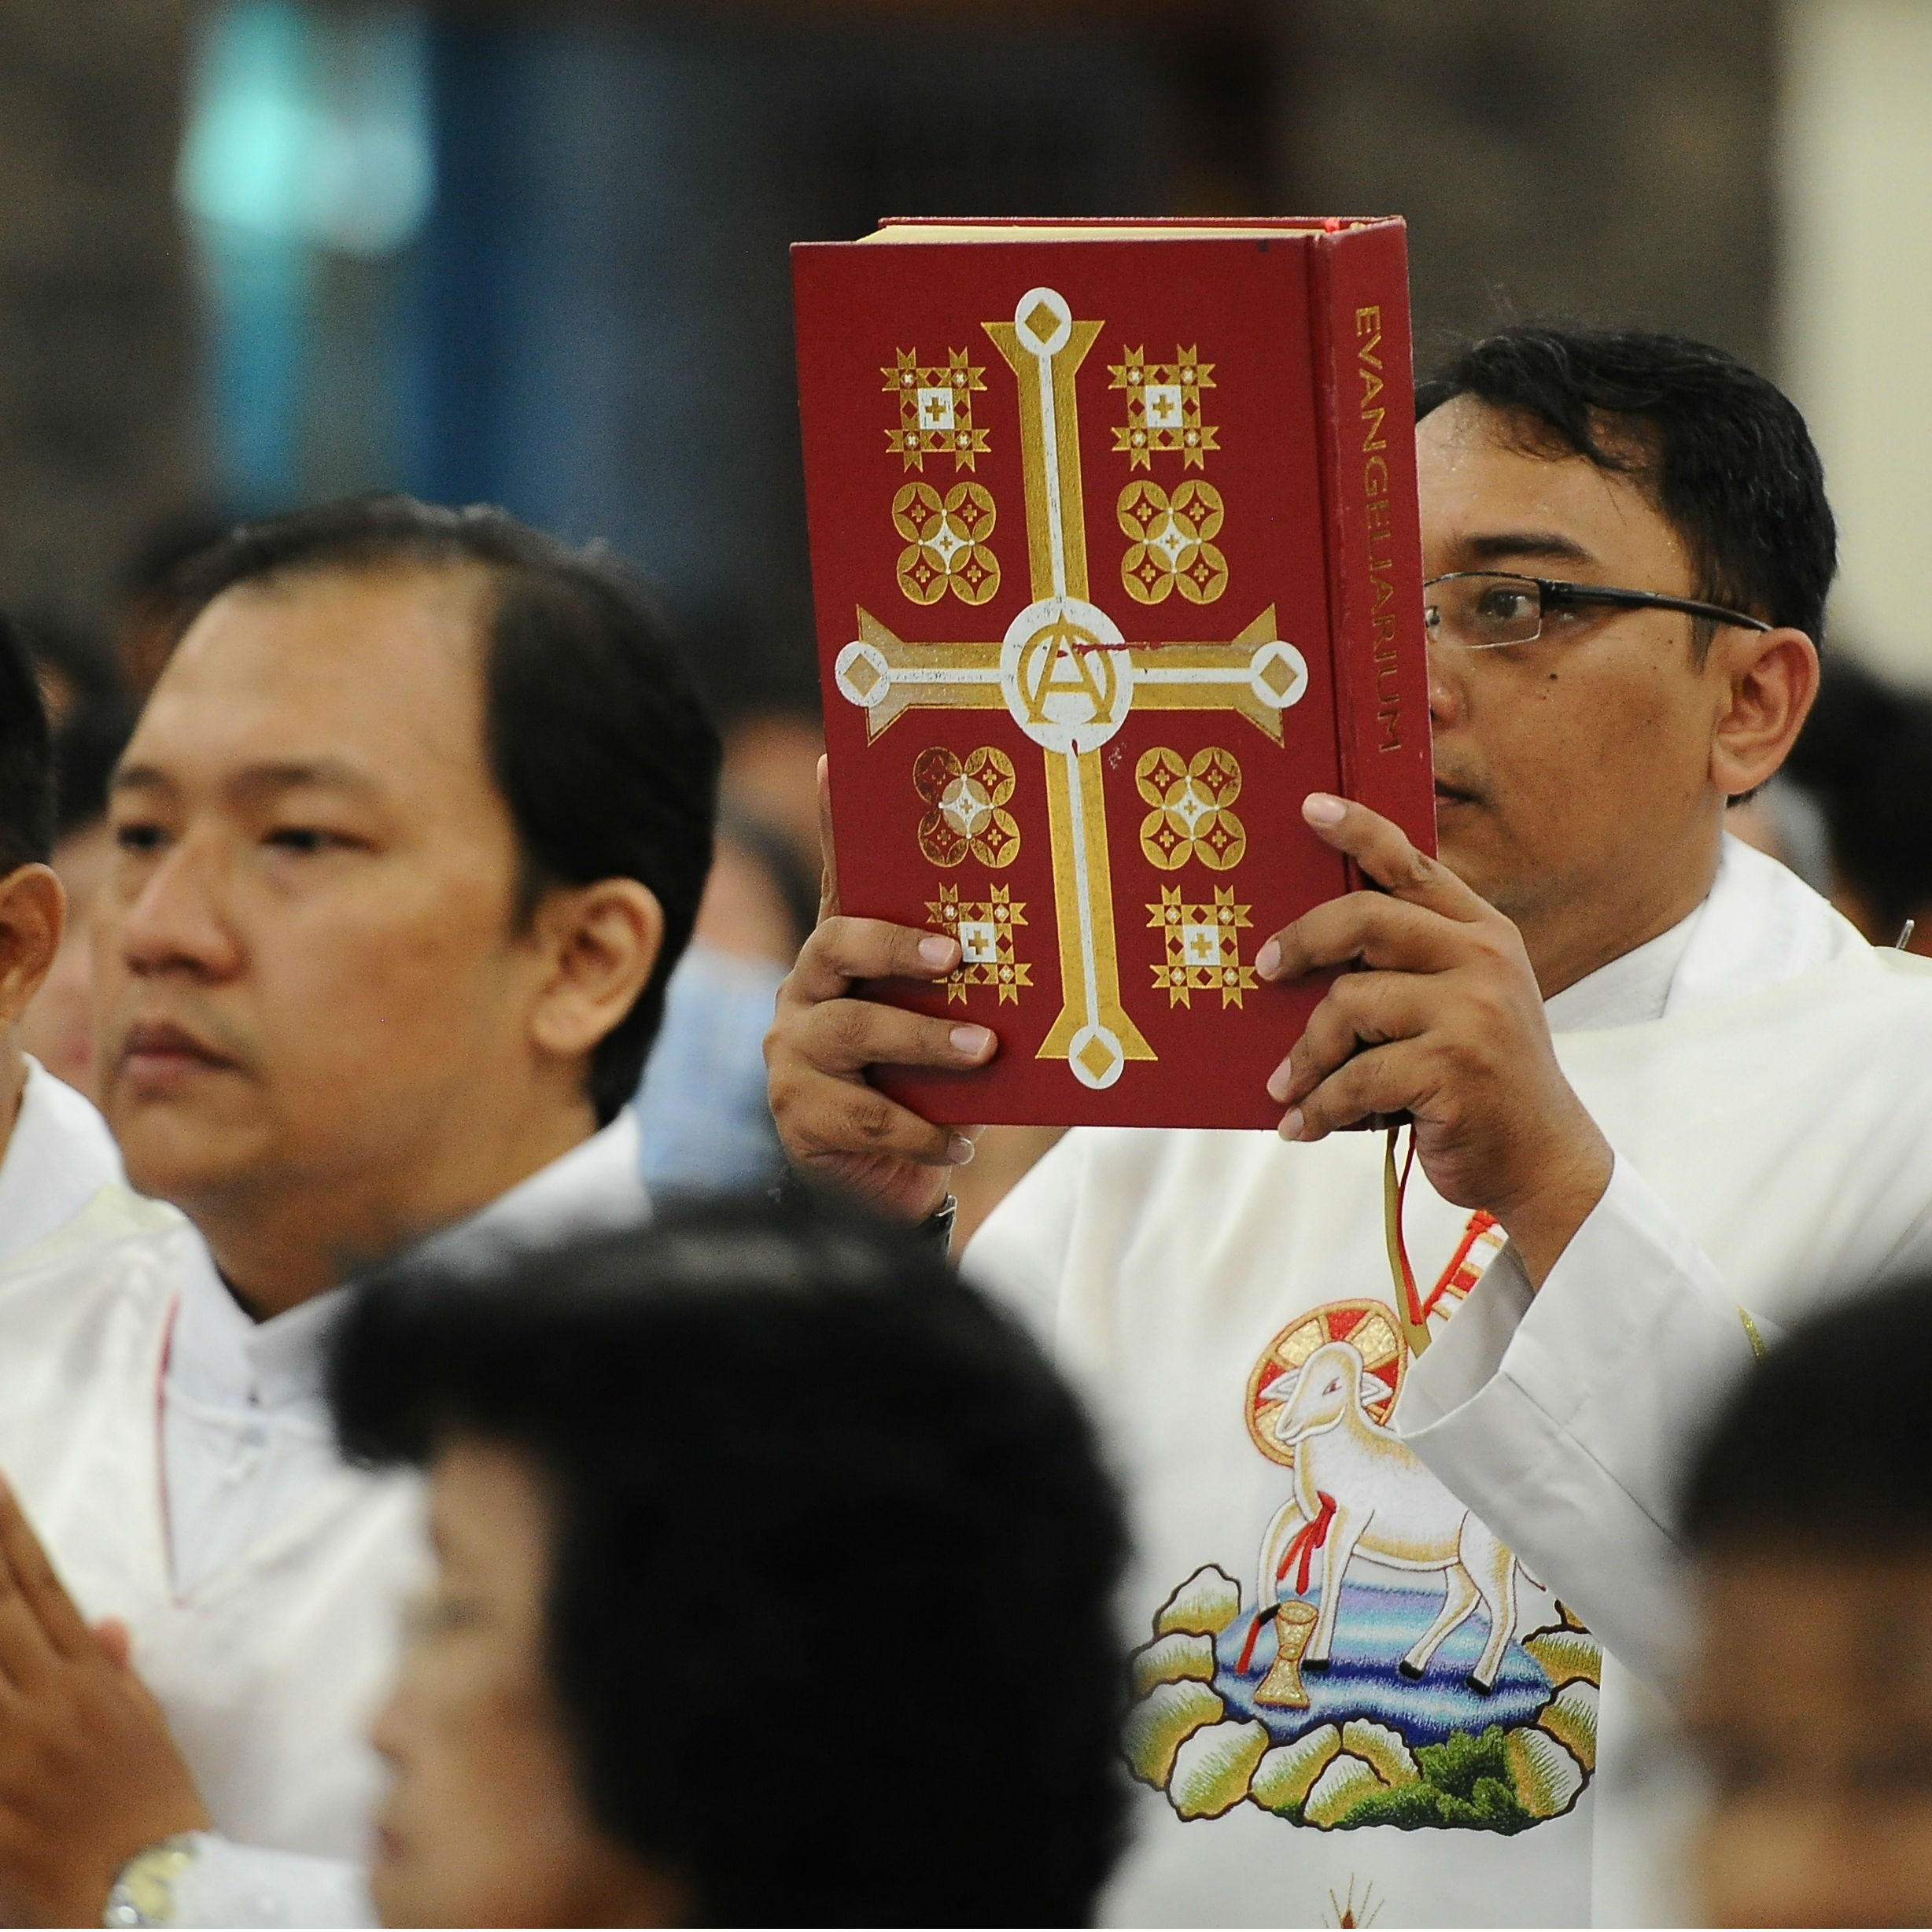 Indonesian priests seek Vatican help in row with bishop over church funds